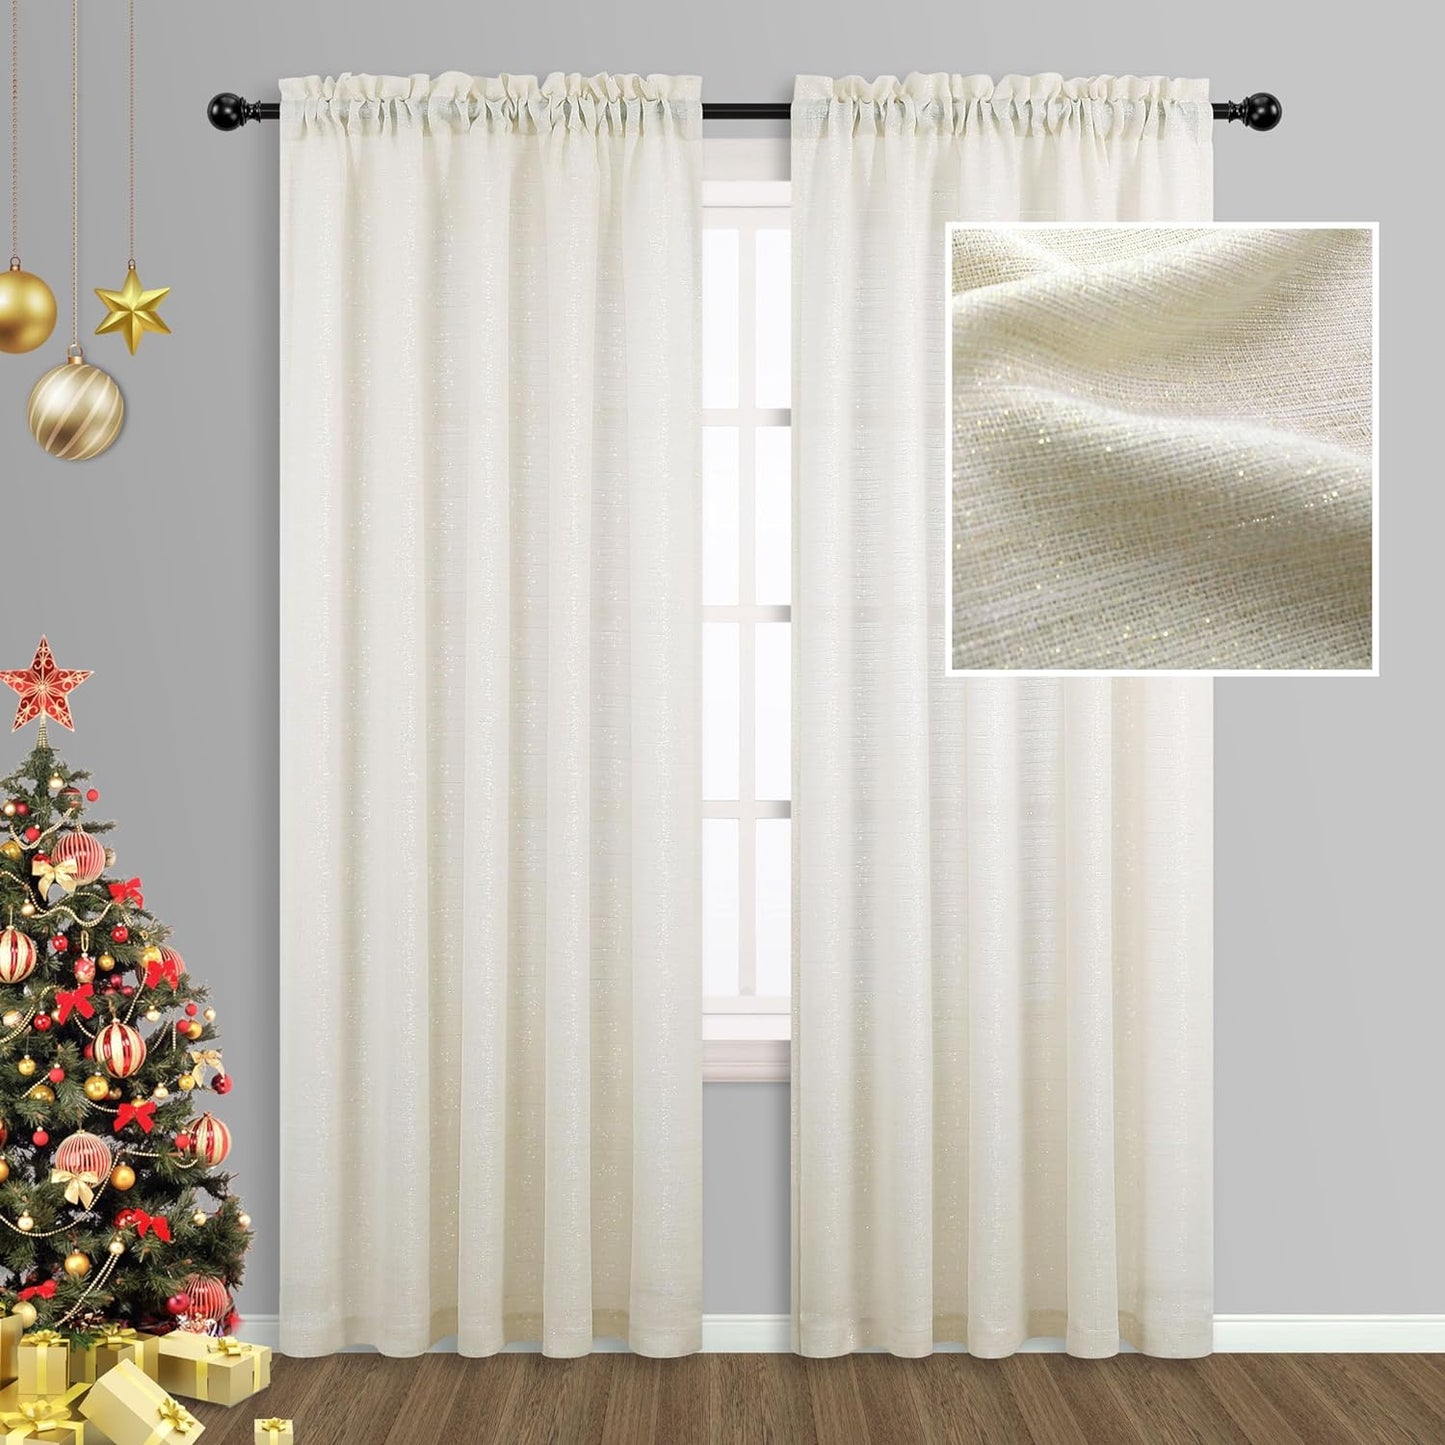 Gold Curtains 84 Inch Length for Living Room 2 Panels Set Rod Pocket Window Decor Semi Sheer Luxury Sparkle Shimmer Shiny Glitter Brown Golden Mustard Curtains for Bedroom 52X84 Long Christmas Decor  MRS.NATURALL TEXTILE Cream Beige 52X84 